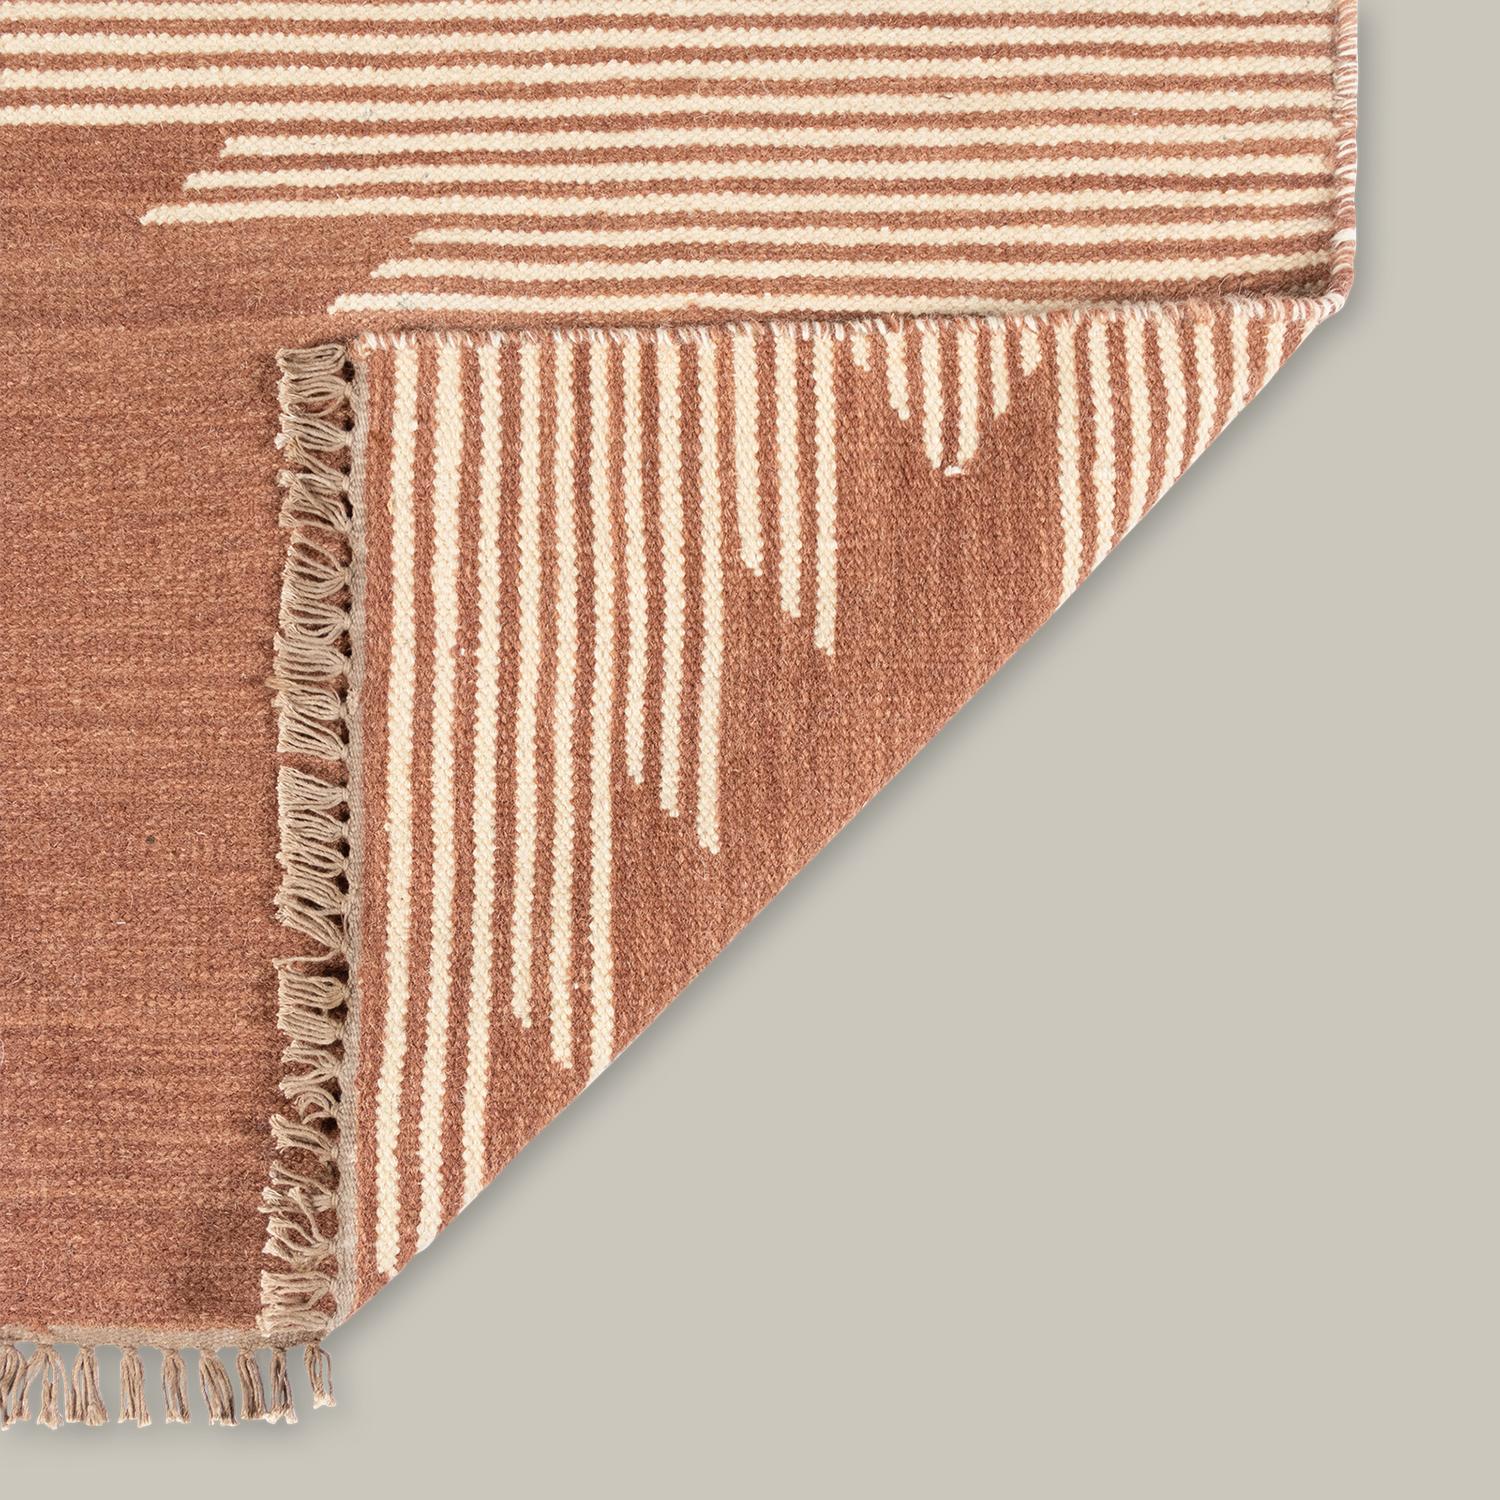 Imbued with a sense of movement, the Metlili Collection nods to the glorious imperfection found in all handcrafted textiles. Handwoven out of wool and finished with an antique wash that mutes colors and ages the material, each pattern has a vintage